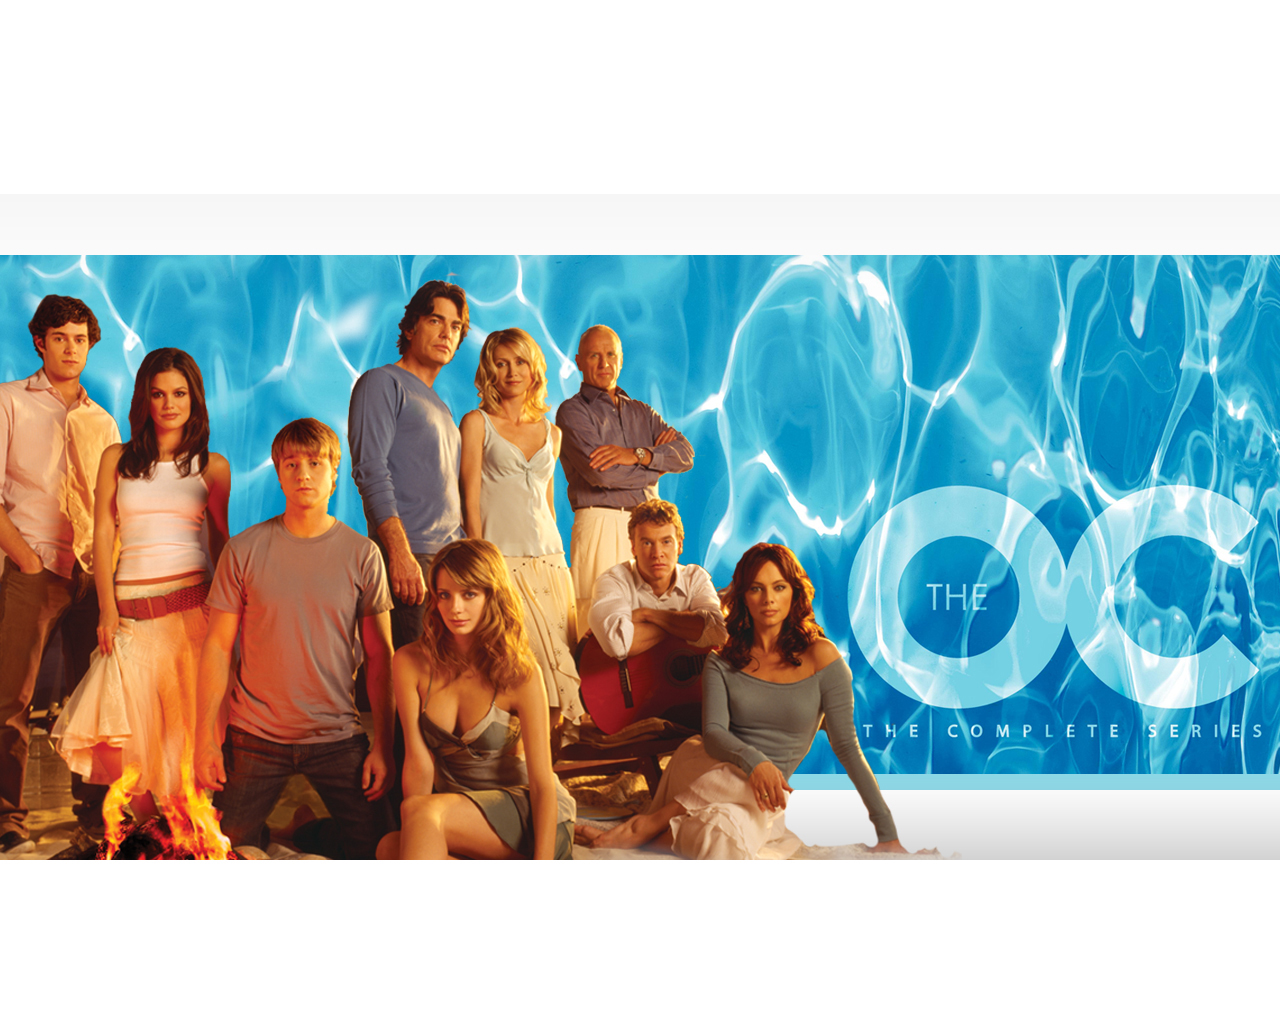 The Oc - "the Oc" (2003) , HD Wallpaper & Backgrounds